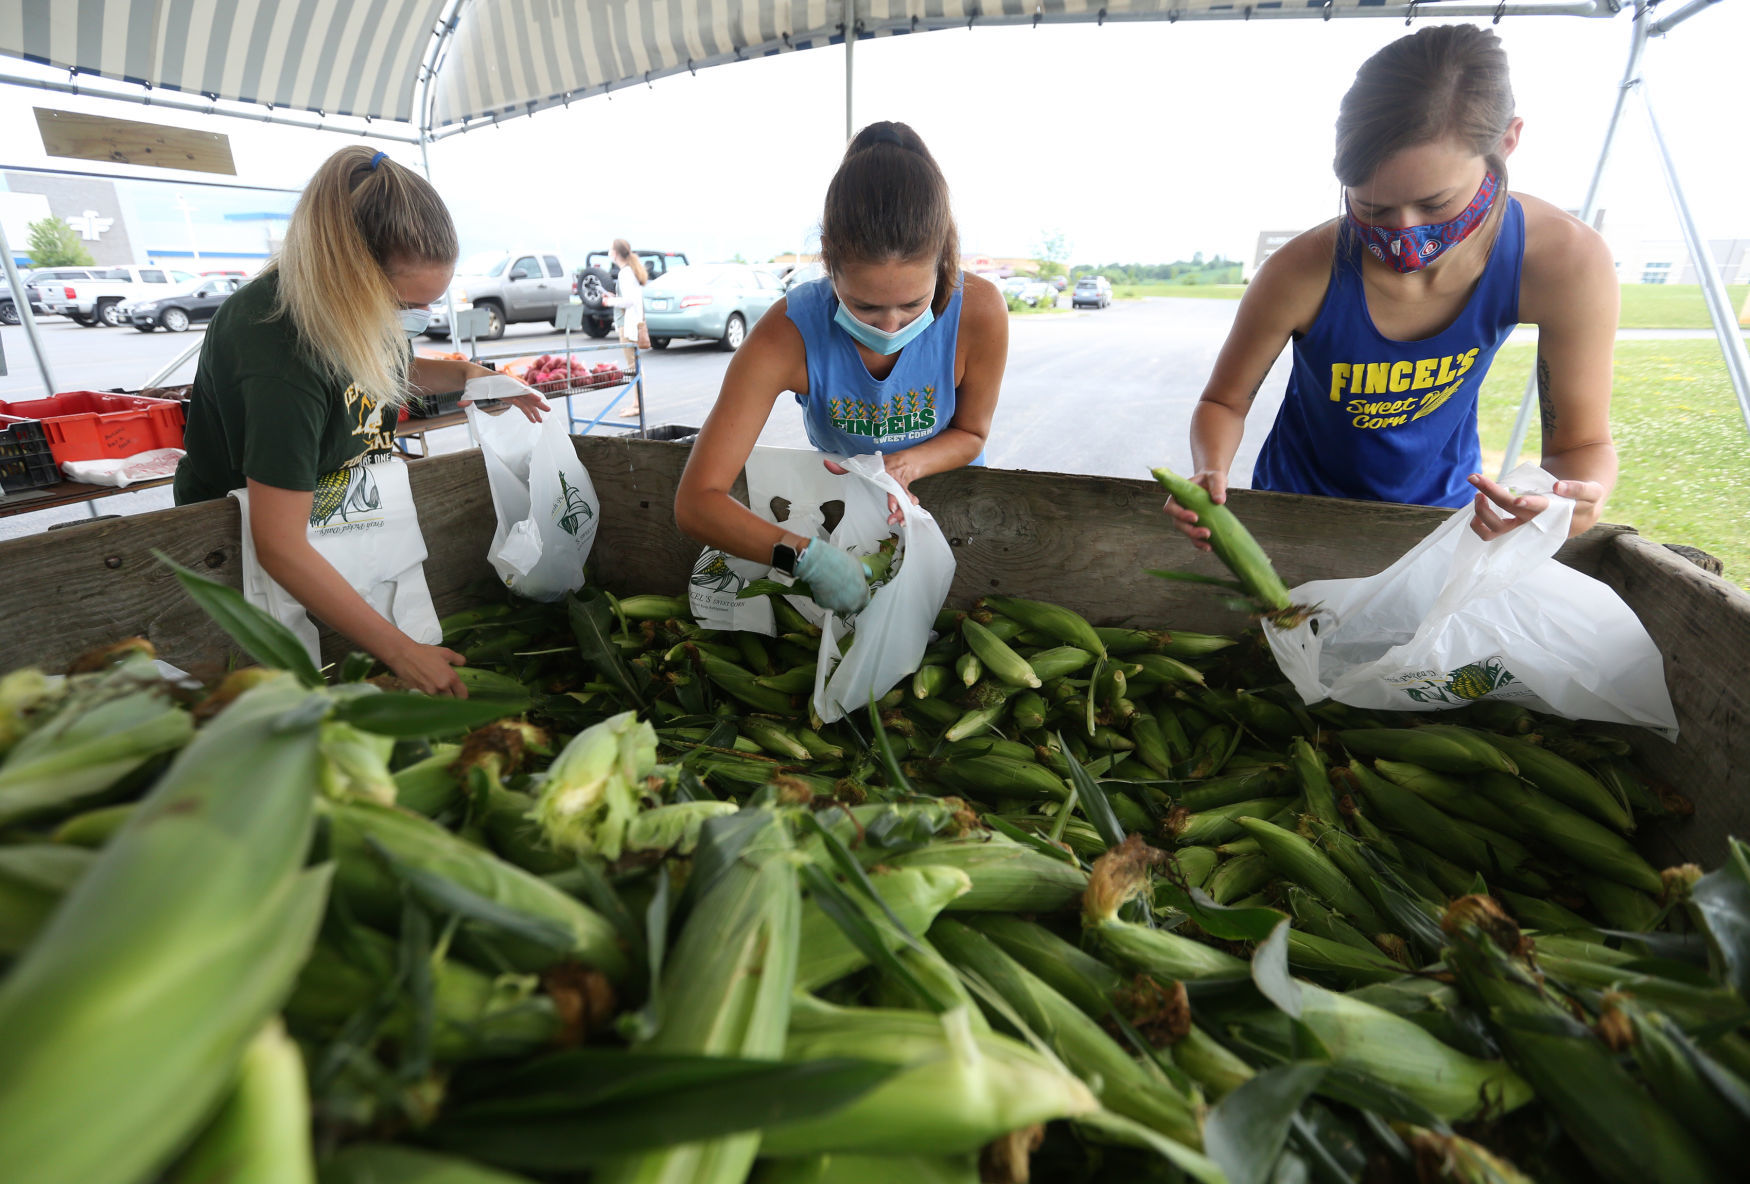 Ashlynn Murphy (from left), Jolyn Thomas and Natalie Marugg bag sweet corn during opening day of Fincel